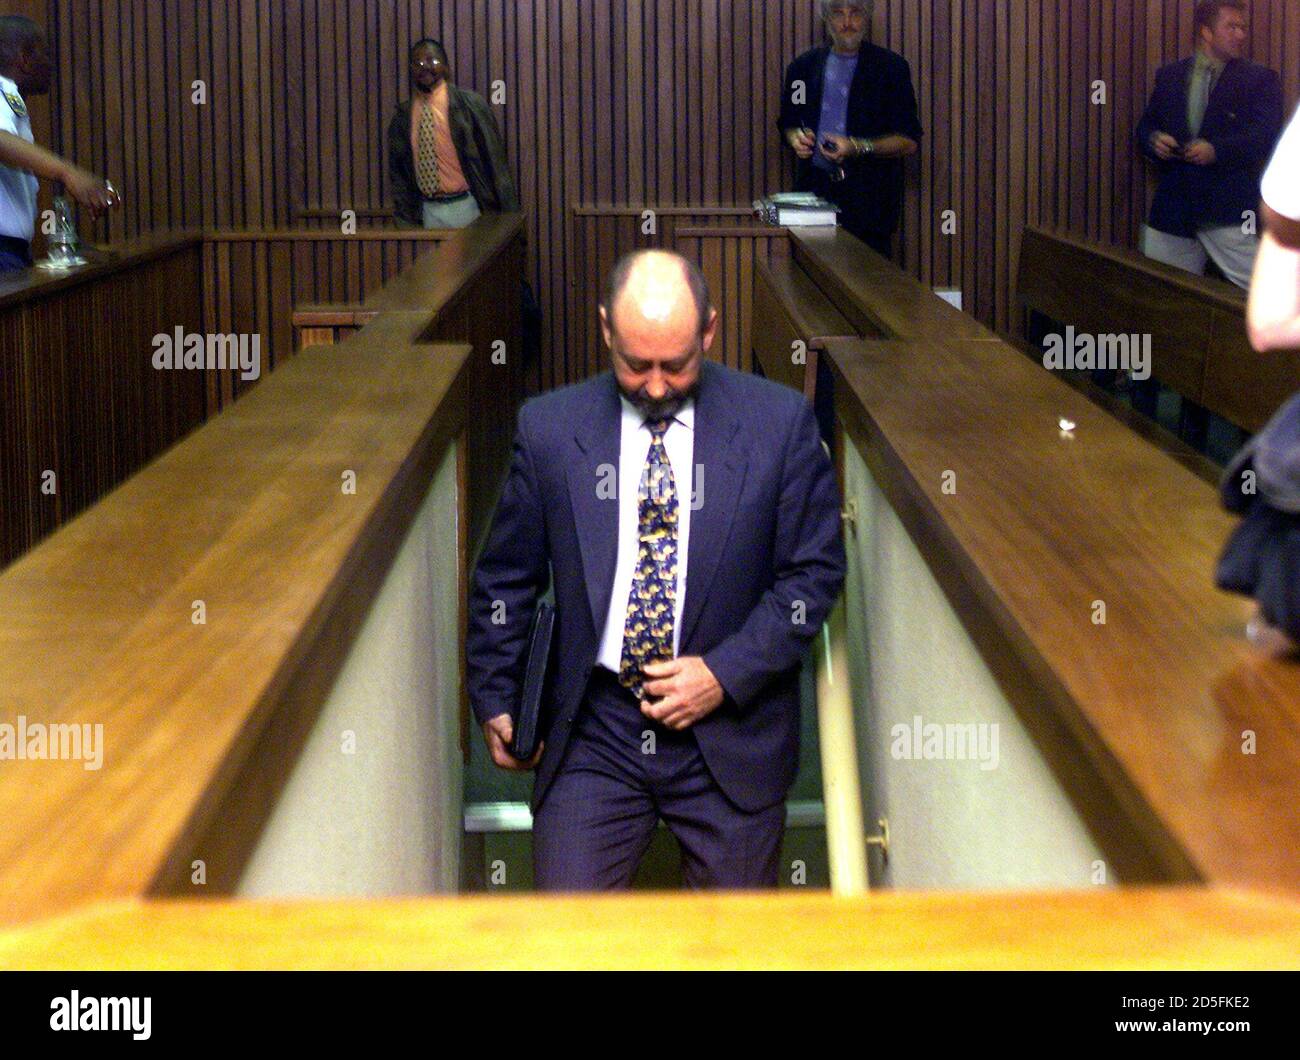 Wouter Basson, a 49-year-old cardiologist, who still operates at the South African army's Pretoria hospital, goes to talk with his lawyers October 6, during a break in his court appearance where he is facing 64 charges ranging from drug dealing to more than 200 murders.  Basson is a military surgeon dubbed 'Doctor Death' for his apartheid era germ and chemical warfare campaign against blacks.  ??» Stock Photo